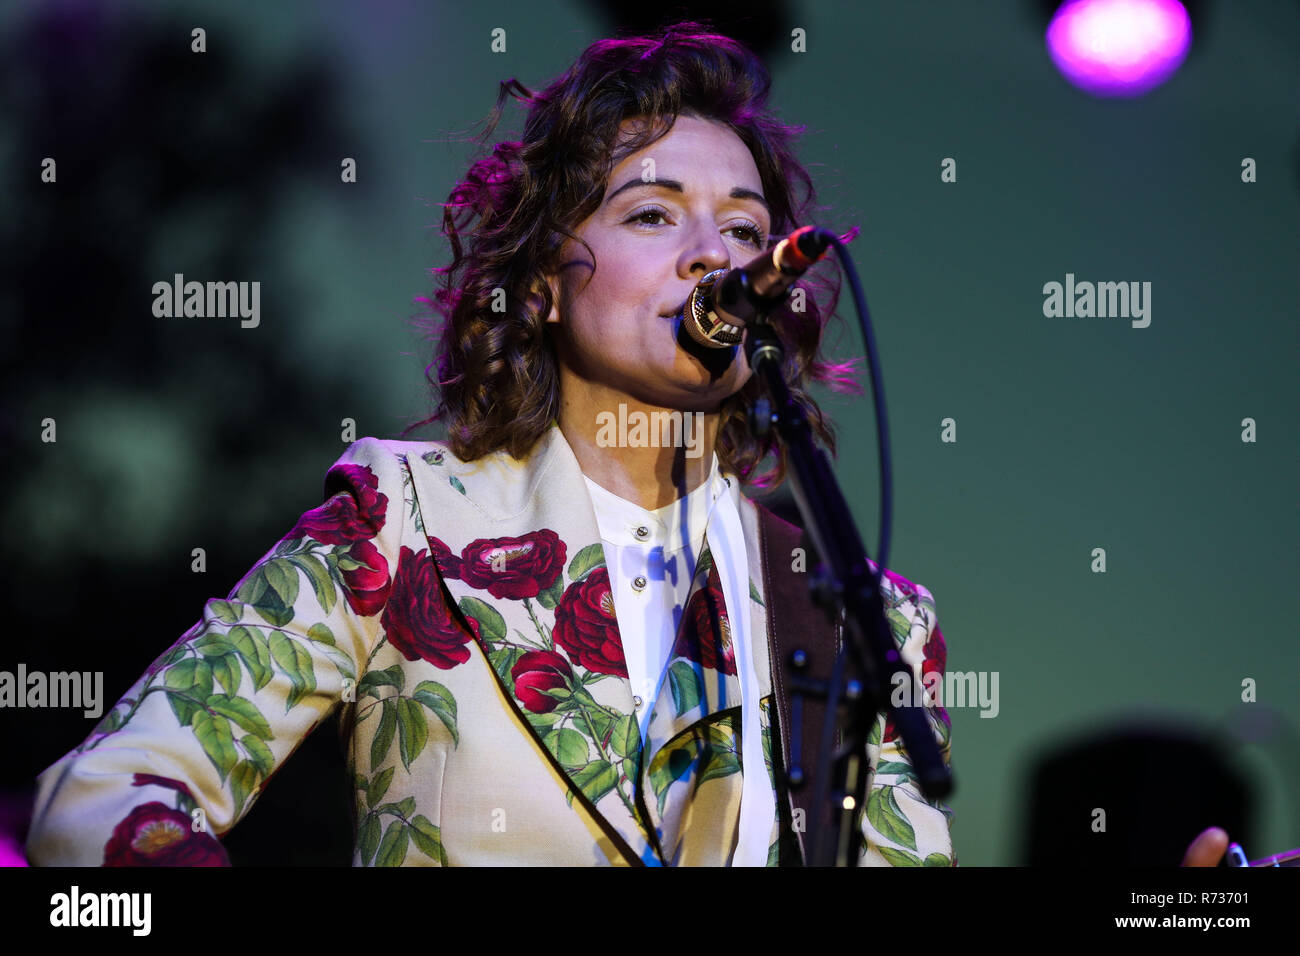 CALABASAS, LOS ANGELES, CA, USA - DECEMBER 02: Singer Brandi Carlile performs onstage at the One Love Malibu Festival Benefit Concert For Woolsey Fire Stock Photo